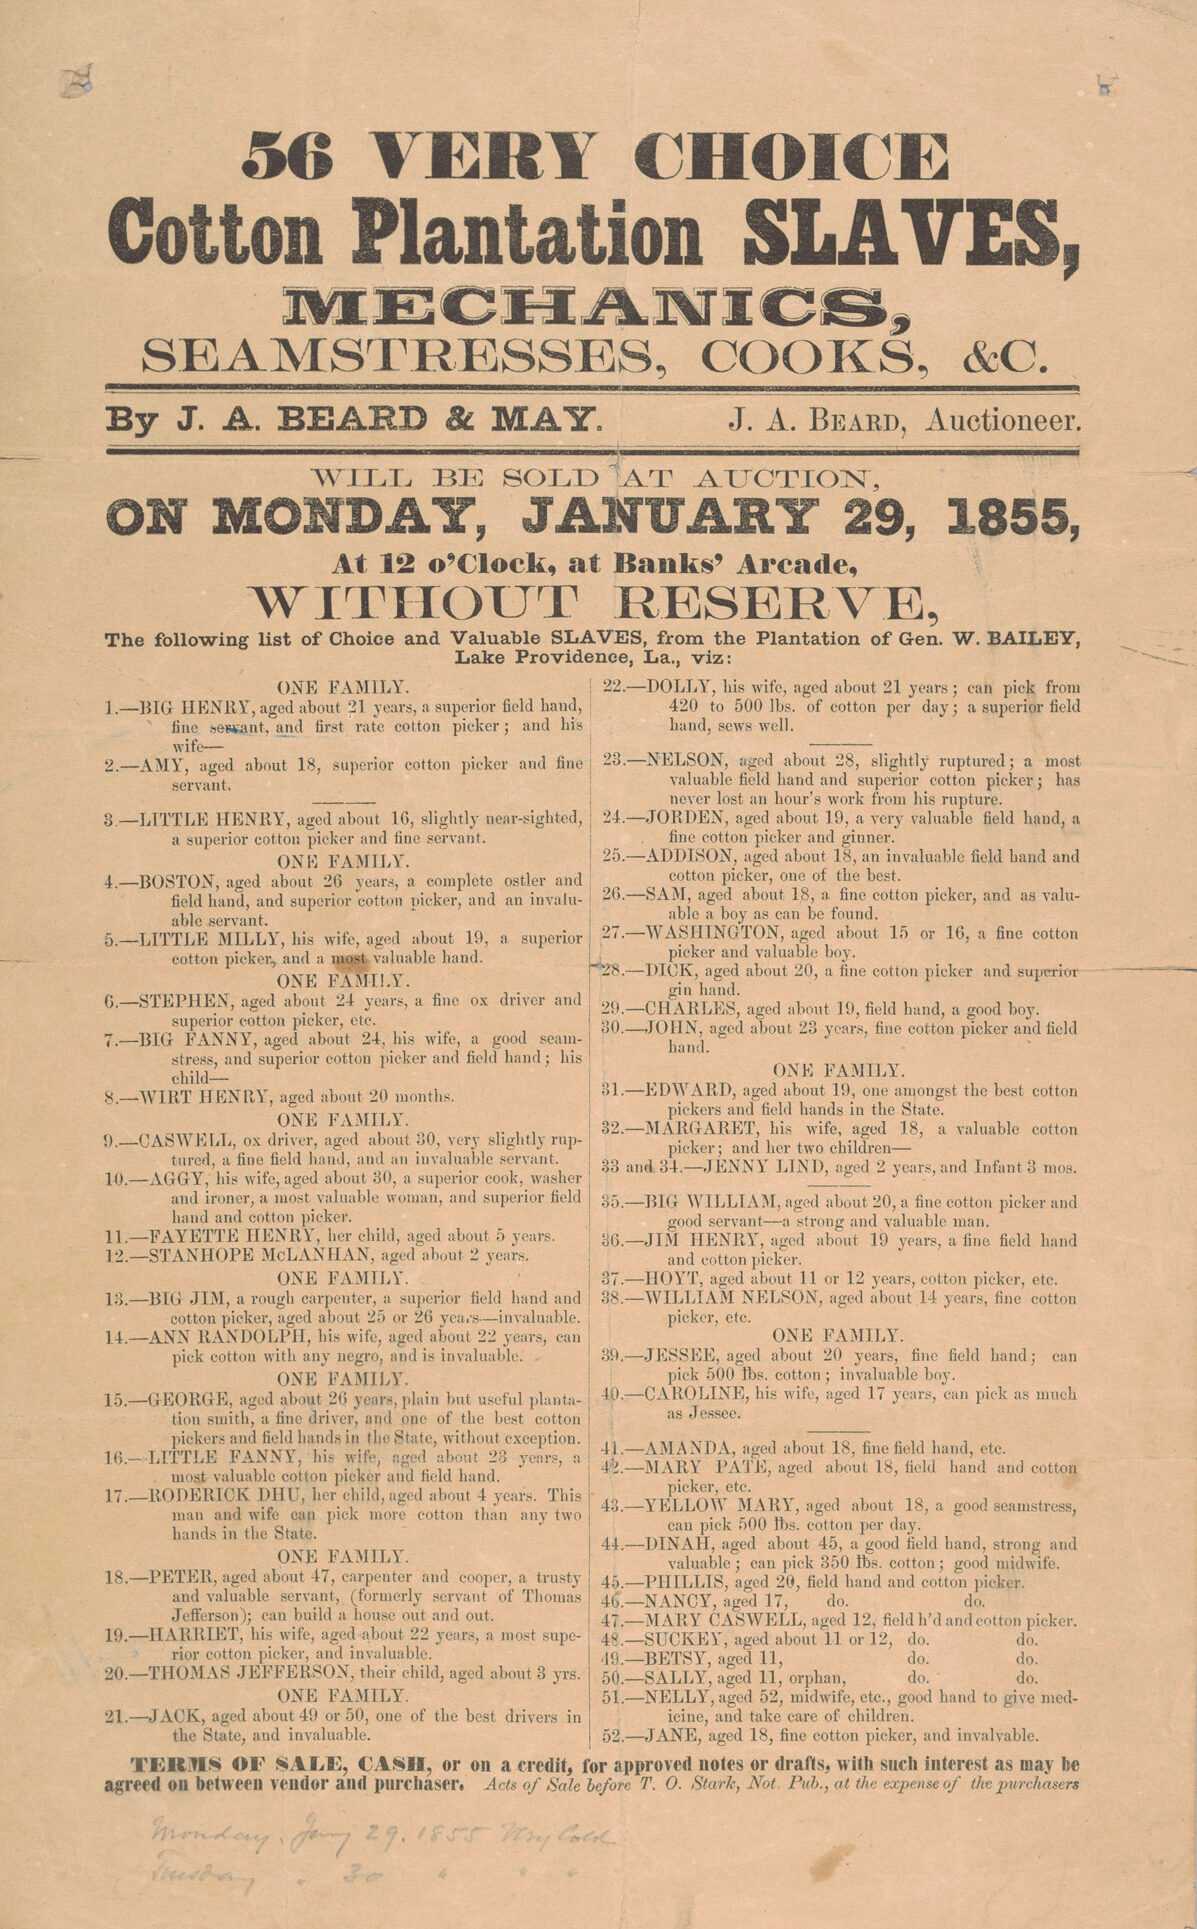 A single-sheet broadside printed in black ink on wood pulp paper. The broadside is an announcement for a slave auction that took place on January 29, 1855 in New Orleans, Louisiana. Written at the top of the broadside in bold lettering is [56 VERY CHOICE / Cotton Plantation SLAVES, / MECHANICS, / SEAMSTRESSES, COOKS, &C.] Between two bold parallel lines printed in smaller lettering is [By J. A. BEARD & MAY. J. A. Beard, Auctioneer]. Below the bottom line printed in the same size font is [WILL BE SOLD AT AUCTION, / ON MONDAY, JANUARY 29, 1855, / At 12 o’Clock, at Banks’ Arcade, / WITHOUT RESERVE, / The following list of choice and Valuable SLAVES, from the Plantation of Gen. W. BAILEY, / Lake Providence, La., viz:]. Printed below this are the names, ages and skills of the enslaved people being auctioned.  Skills and occupations listed include cotton picker, ox driver, slave driver, seamstress, ironer, carpenter, cooper, cotton gin hand, midwife, and field hand. There are fifty-six people listed in two columns, organized by family units with ten families total listed. 

The enslaved persons to be auctioned are listed as follows:

One Family:
Big Henry, 21
Amy, 18
Little Henry, 16 

One Family:
Boston, 26
Little Milly, 19
Family
Stephen, 24
Big Fanny, 24
Writ Henry, 20 mo.

One Family:
Caswell, 30
Aggy, 30
Fayette Henry, 5
Stanhope McLanhan, 2

One Family:
Big Jim, 25
Ann Randolph, 22

One Family:
George, 26
Little Fanny, 23
Roderick Dhu, 4

One Family:
Peter, 47
Harriet, 22
Thomas Jefferson, 3

One Family:
Jack, 50
Dolly, 21
  ______
Nelson, 28
Jorden, 19
Addison, 18
Sam, 18
Washington, 16
Dick, 20
Charles, 19
John, 23

One Family
Edward, 19
Margaret, 18
Jenny Lind, 2
Unidentified infant, 3 mo.
Big William, 20
Jim Henry, 20
Hoyt, 12
William Nelson, 14

One Family:
Jessee, 20
Caroline, 17
   ______
Amanda, 18
Mary Pate, 18
Yellow Mary, 18
Dinah, 45
Phillis, 20
Nancy, 17
Mary Caswell, 12
Suckey, 12
Betsy, 11
Sally, 11
Nelly, 52
Jane, 18

Beneath the listing of enslaved persons is printed text with the terms of sale, followed by a handwrittten inscription reading [Monday, Jany 29, 1855 Very Cold / Tuesday " 30 " " "].